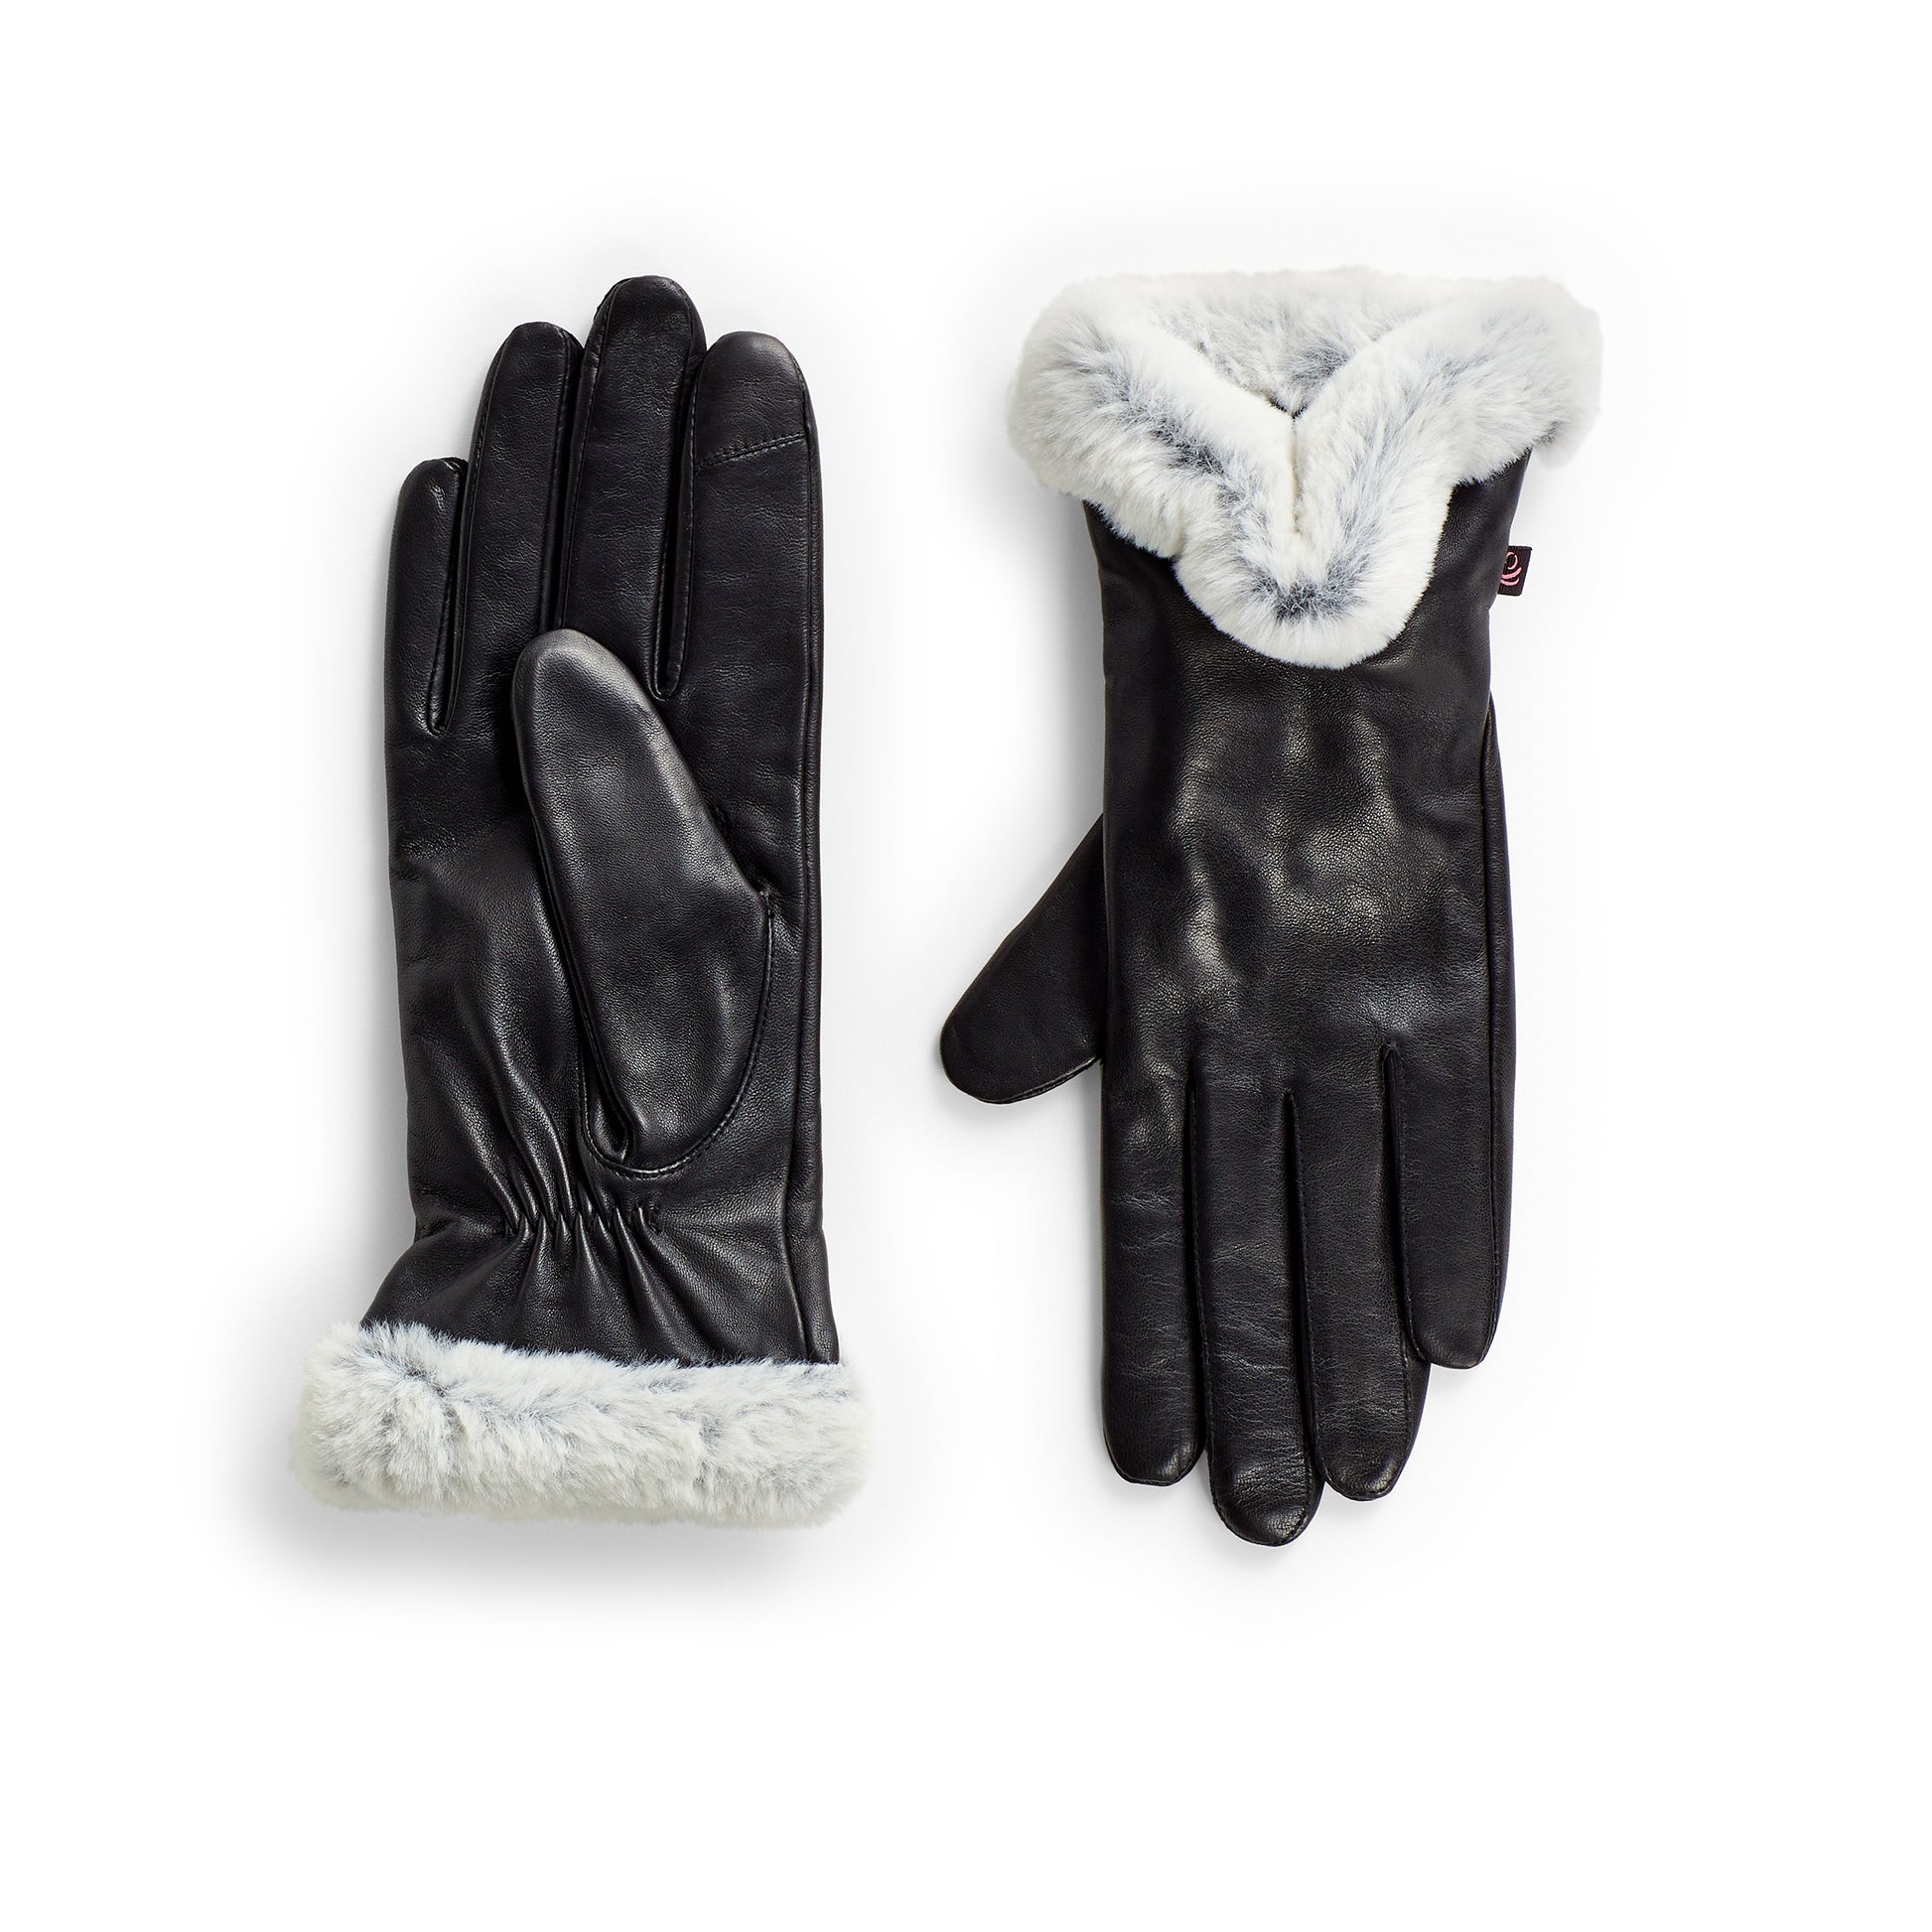 Black with Contrast Cuff; @Black leather glove with faux fur contrast cuff